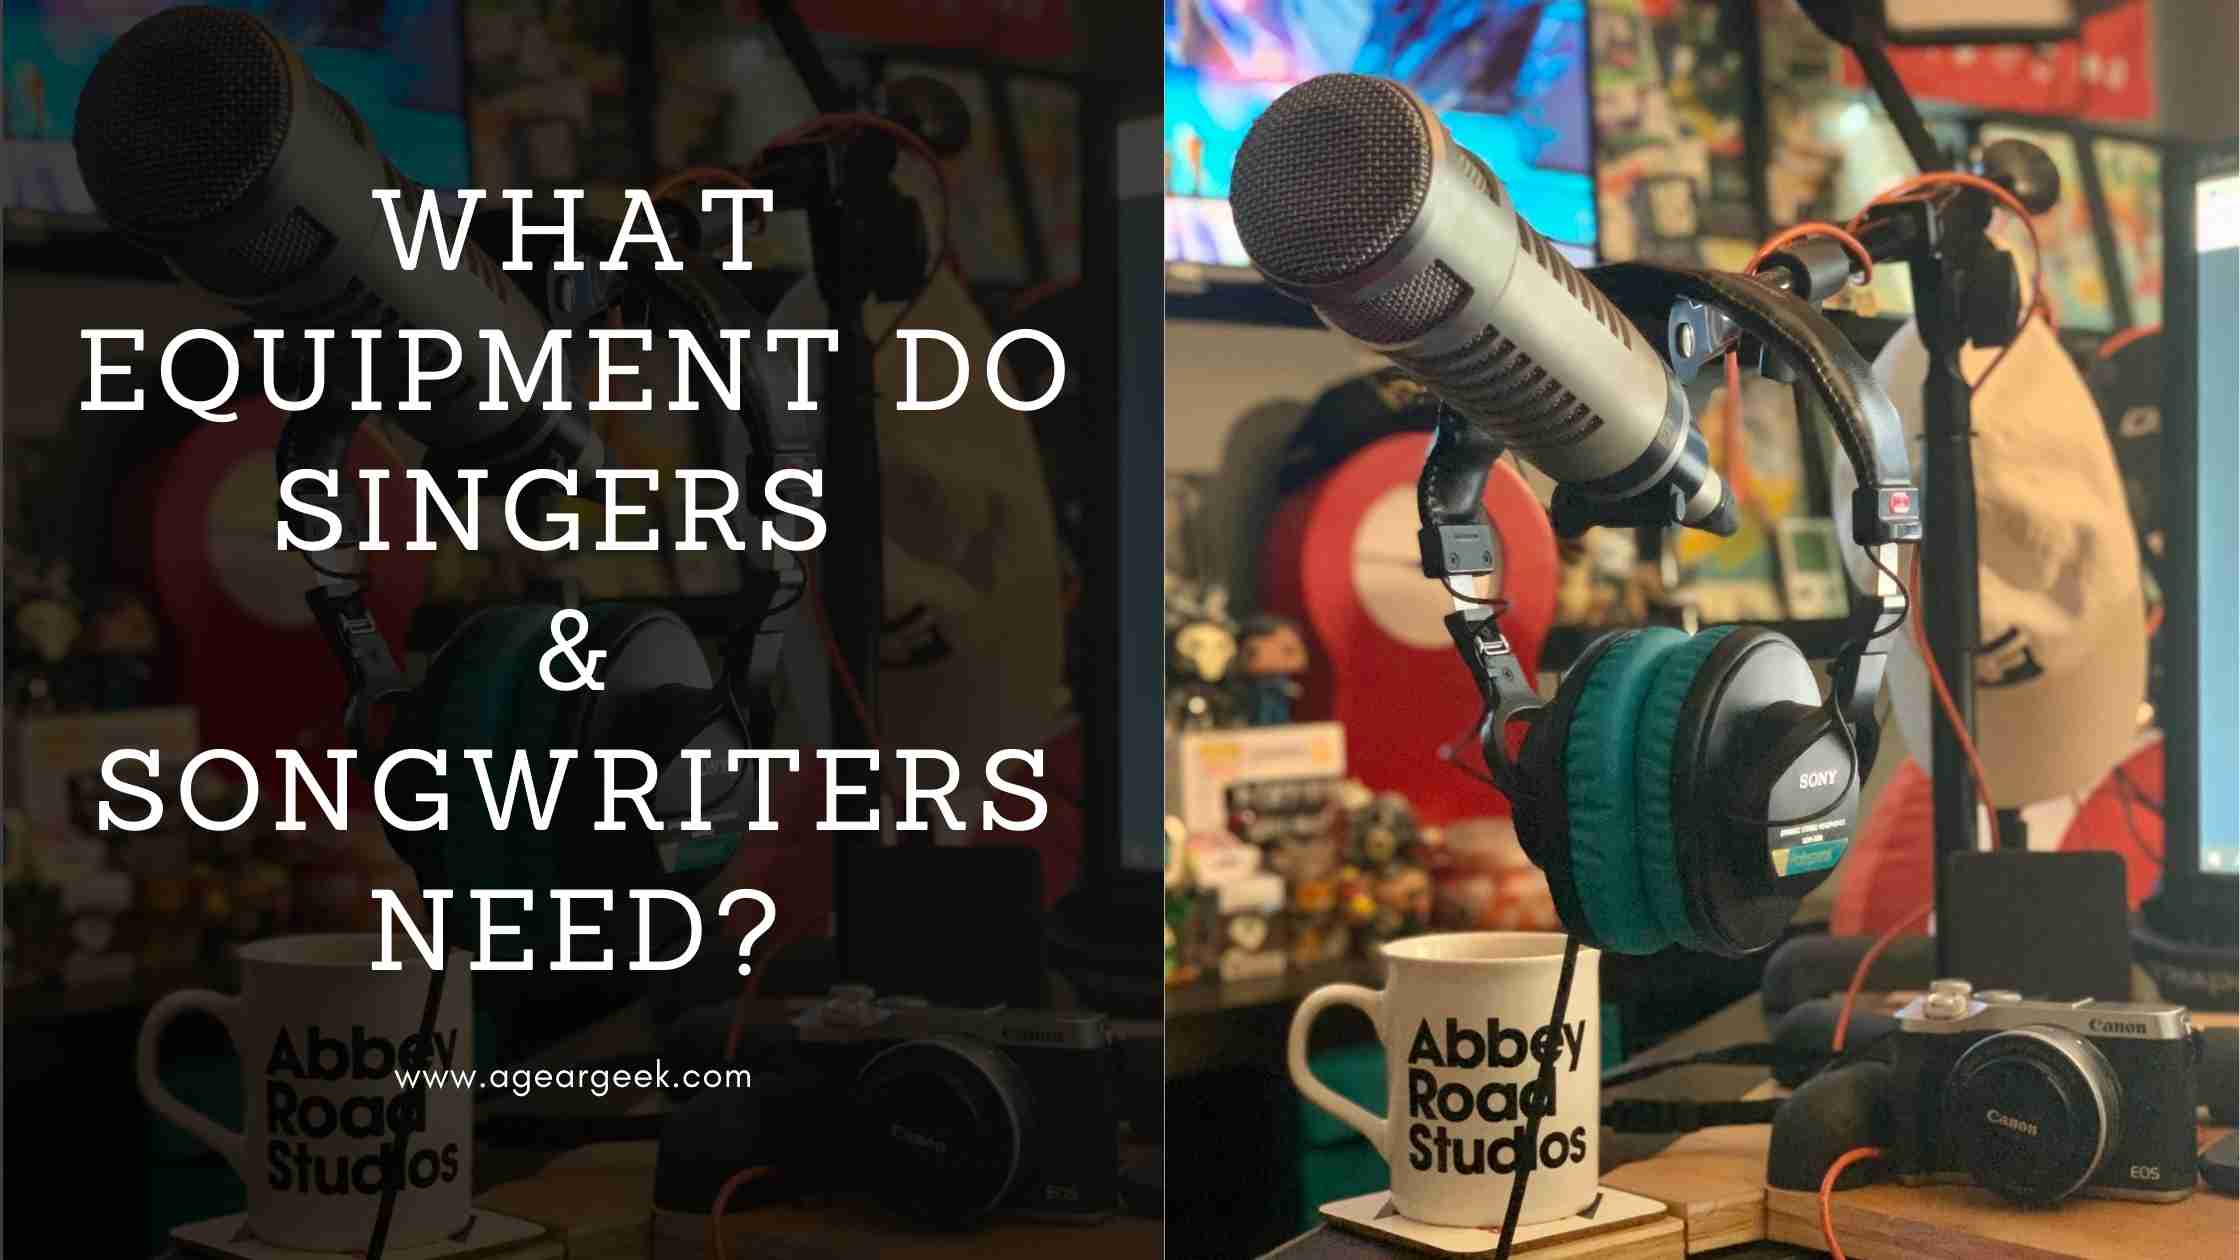 What equipment do singers and songwriters need